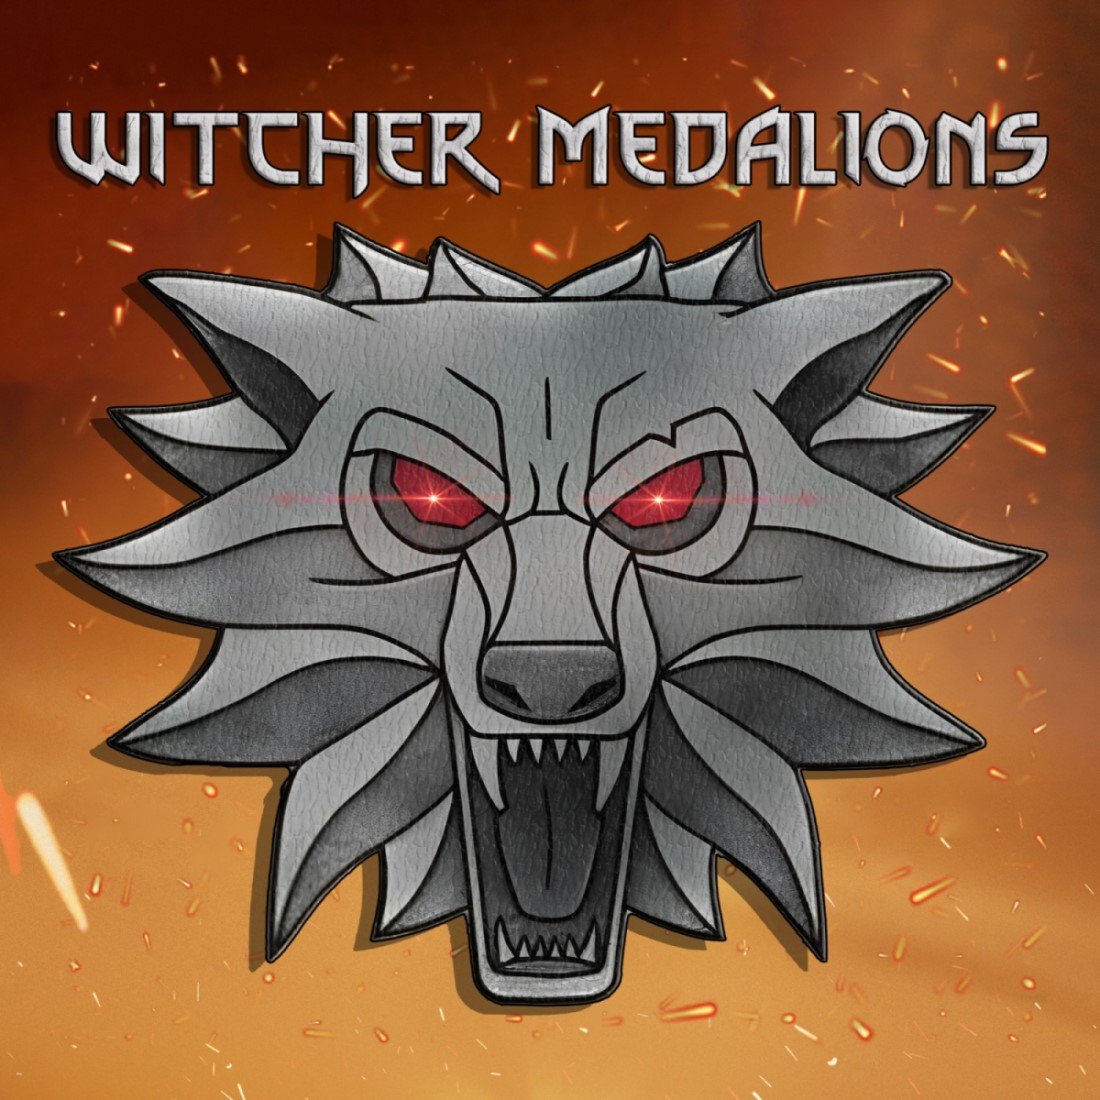 Witcher Medalions